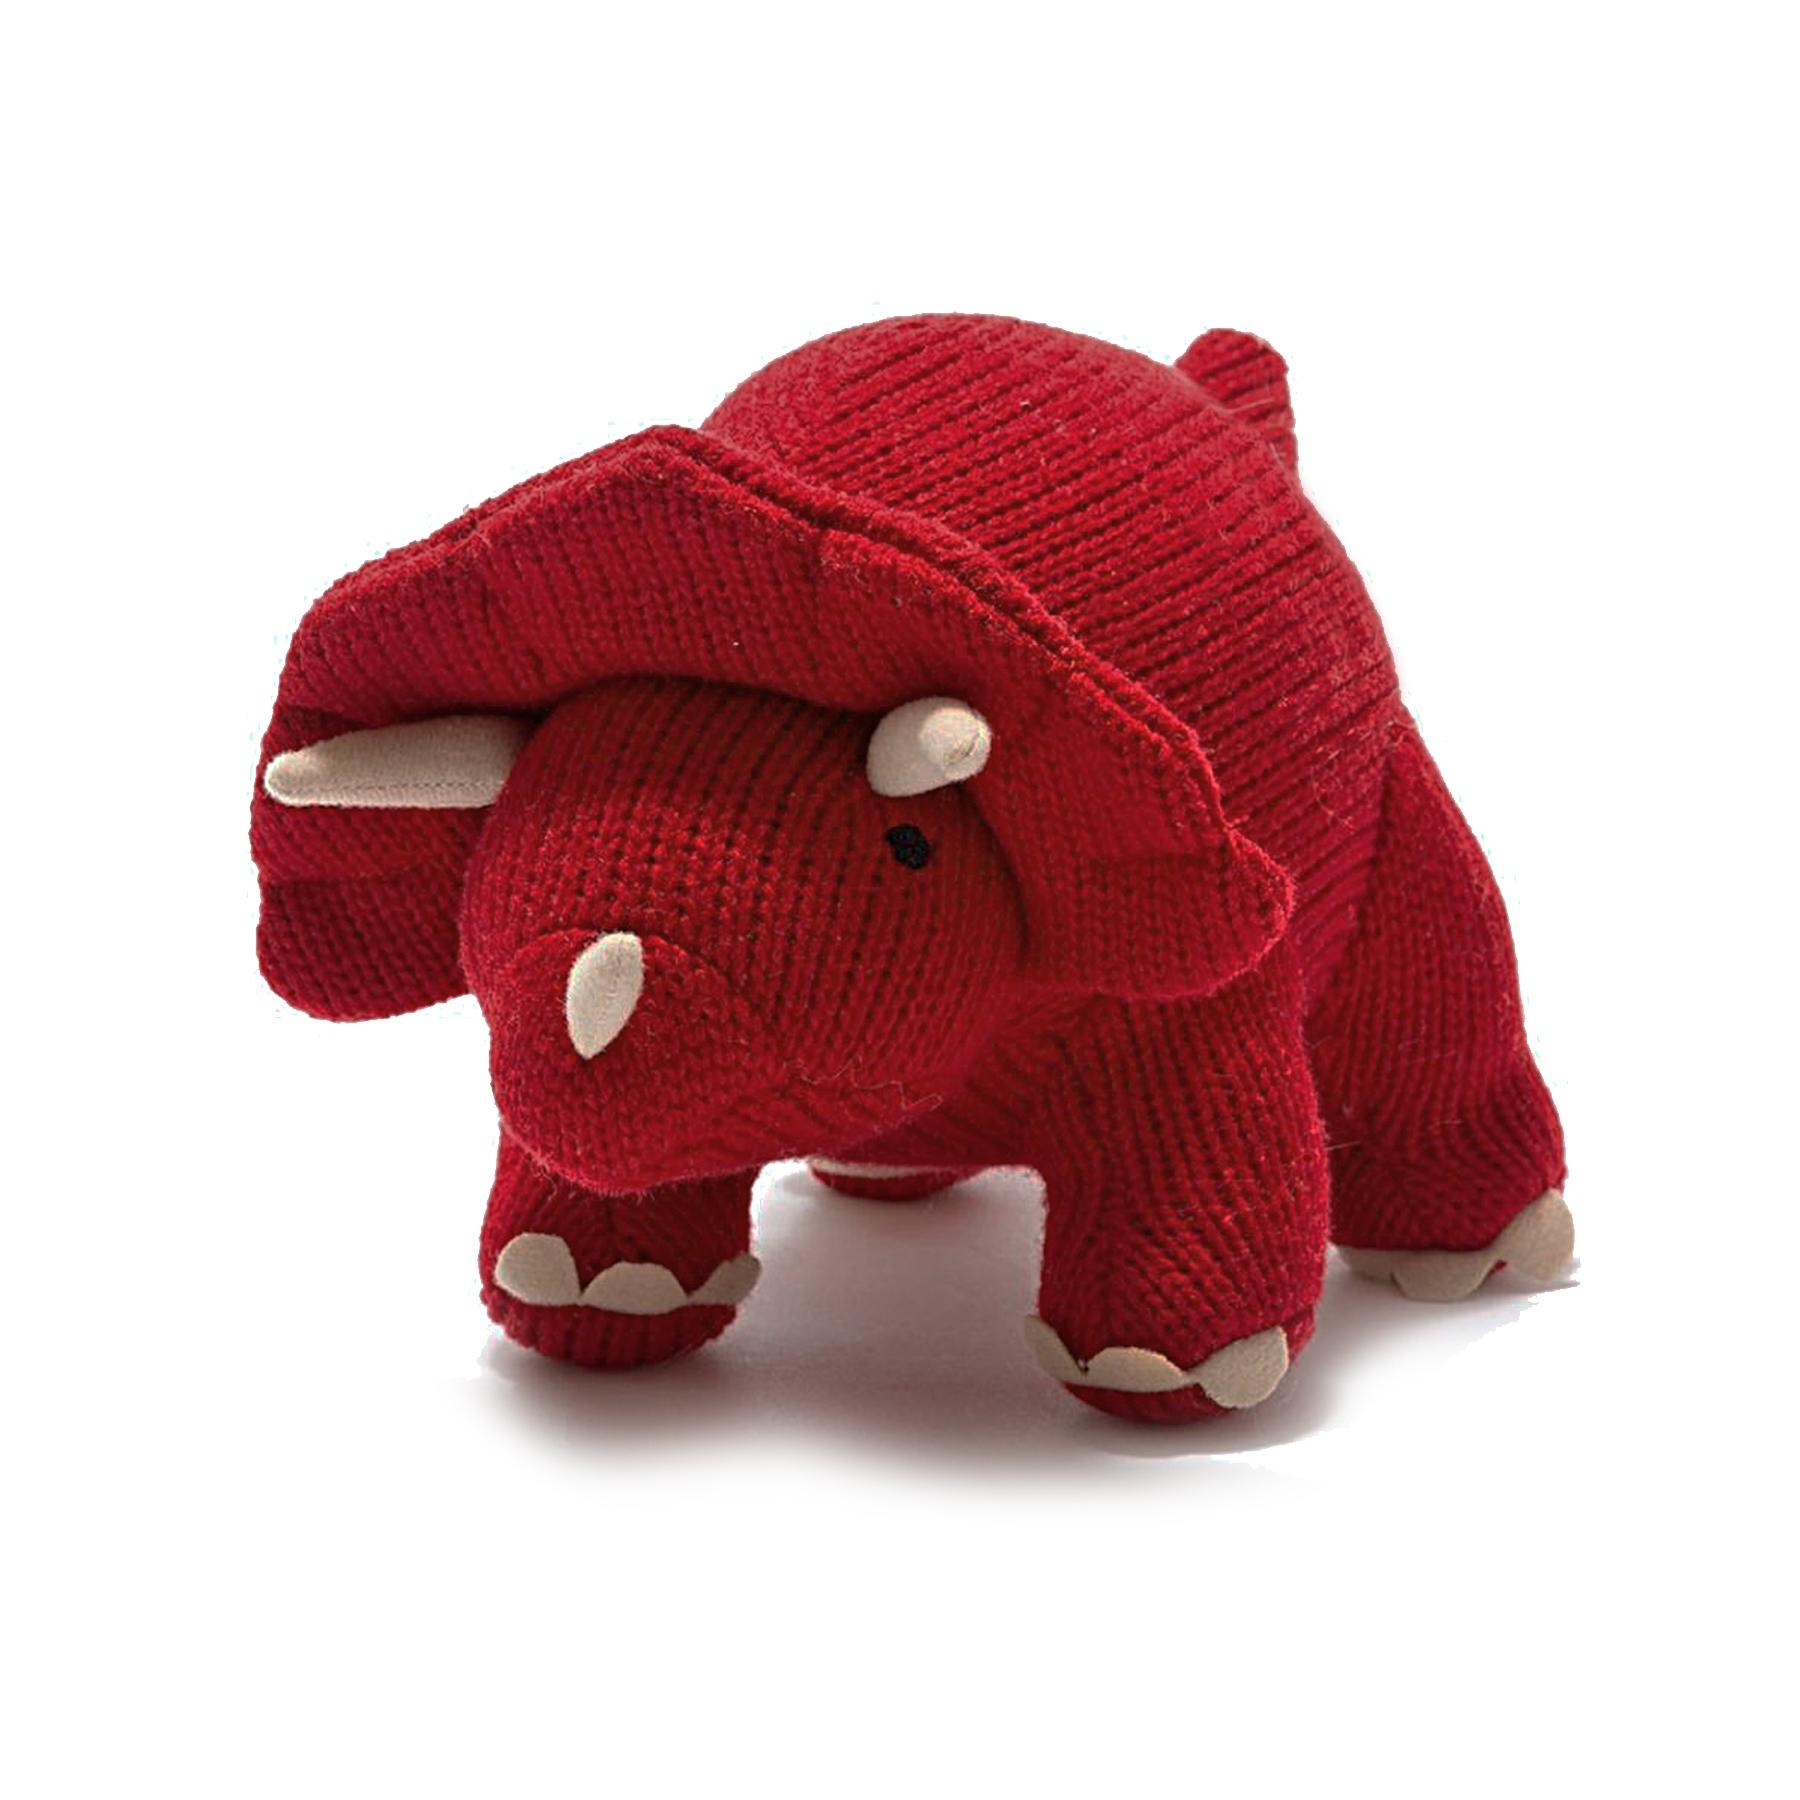 Best Years Original Red Knitted Triceratops